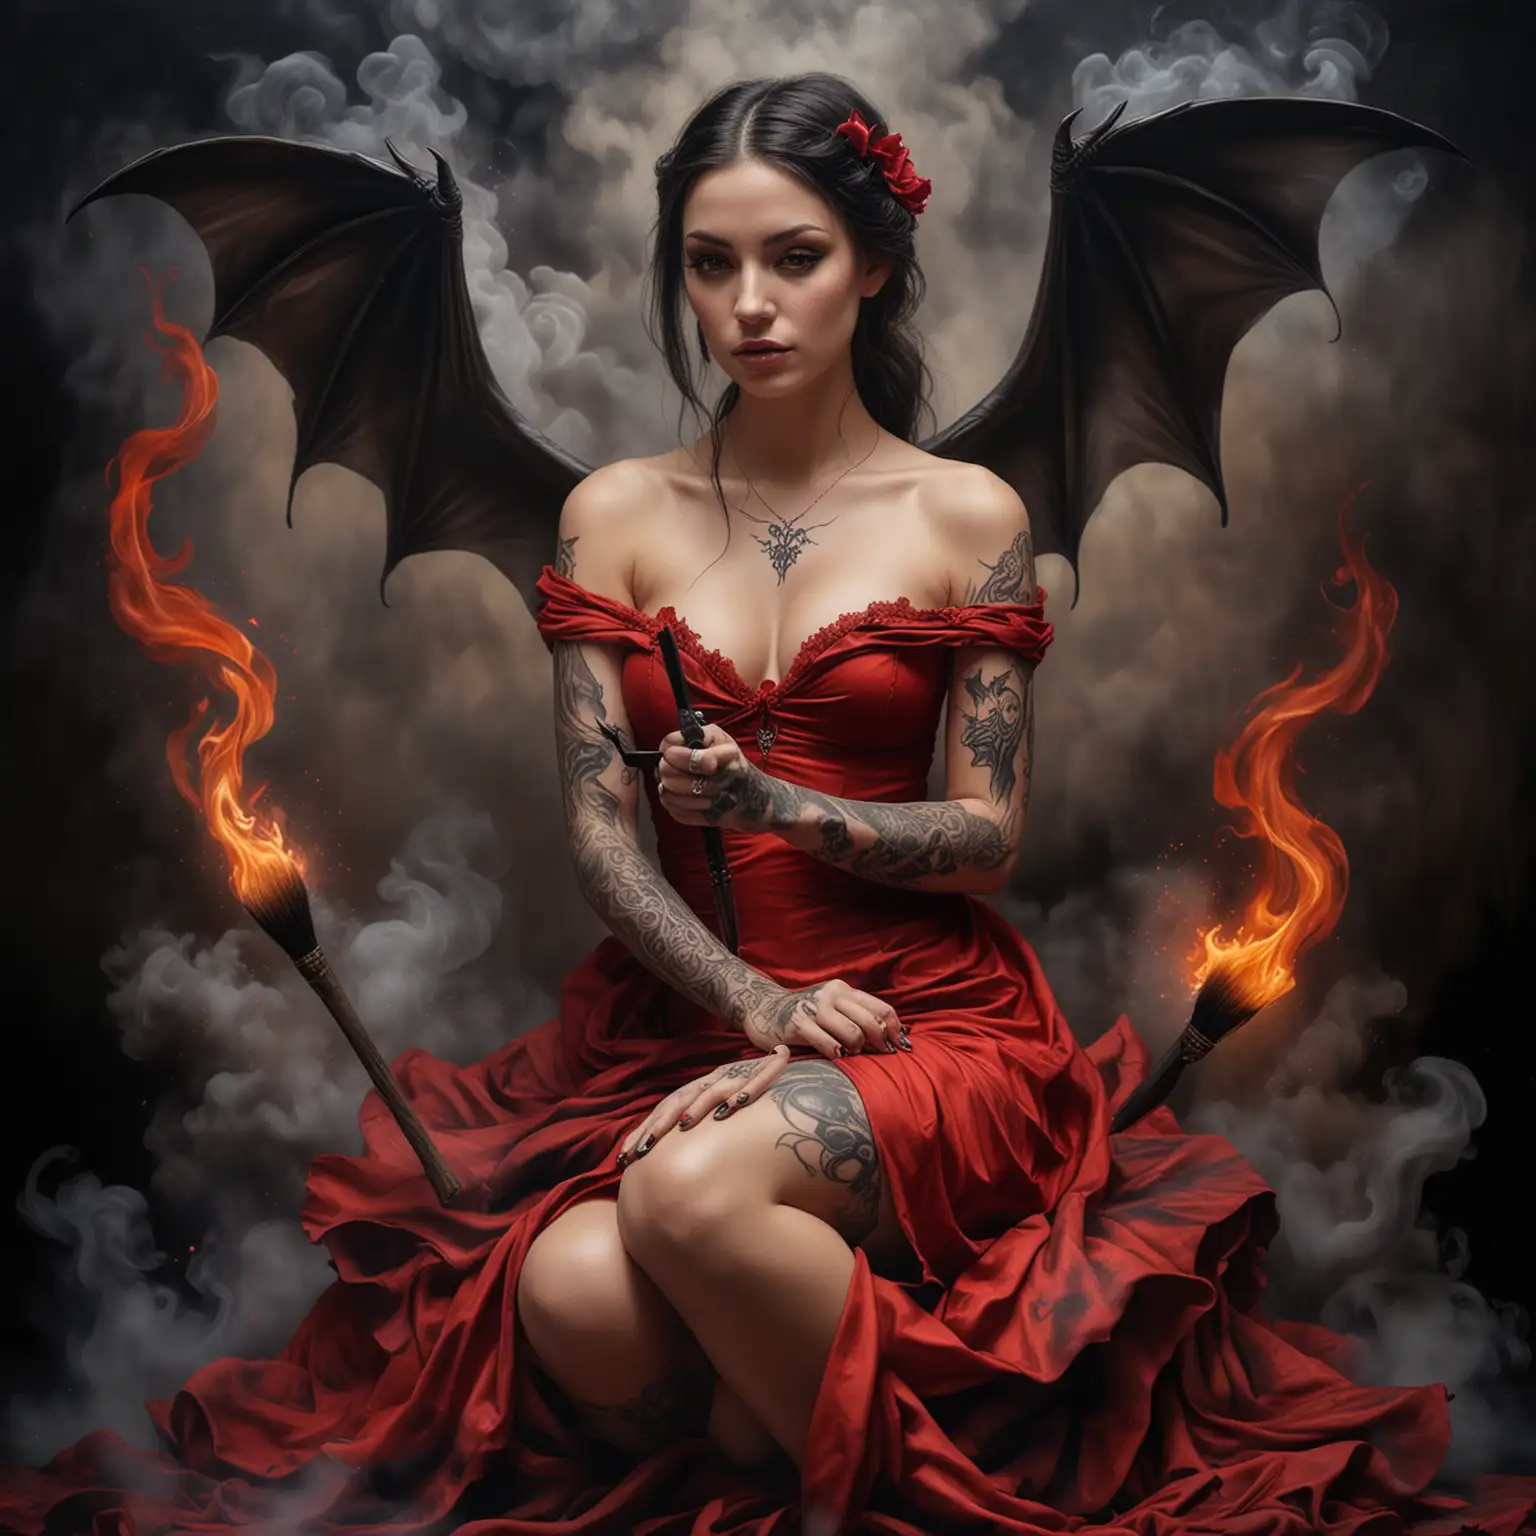 Hyper Realistic Tattooed Angel Painting on Canvas amidst Smoke and Flames